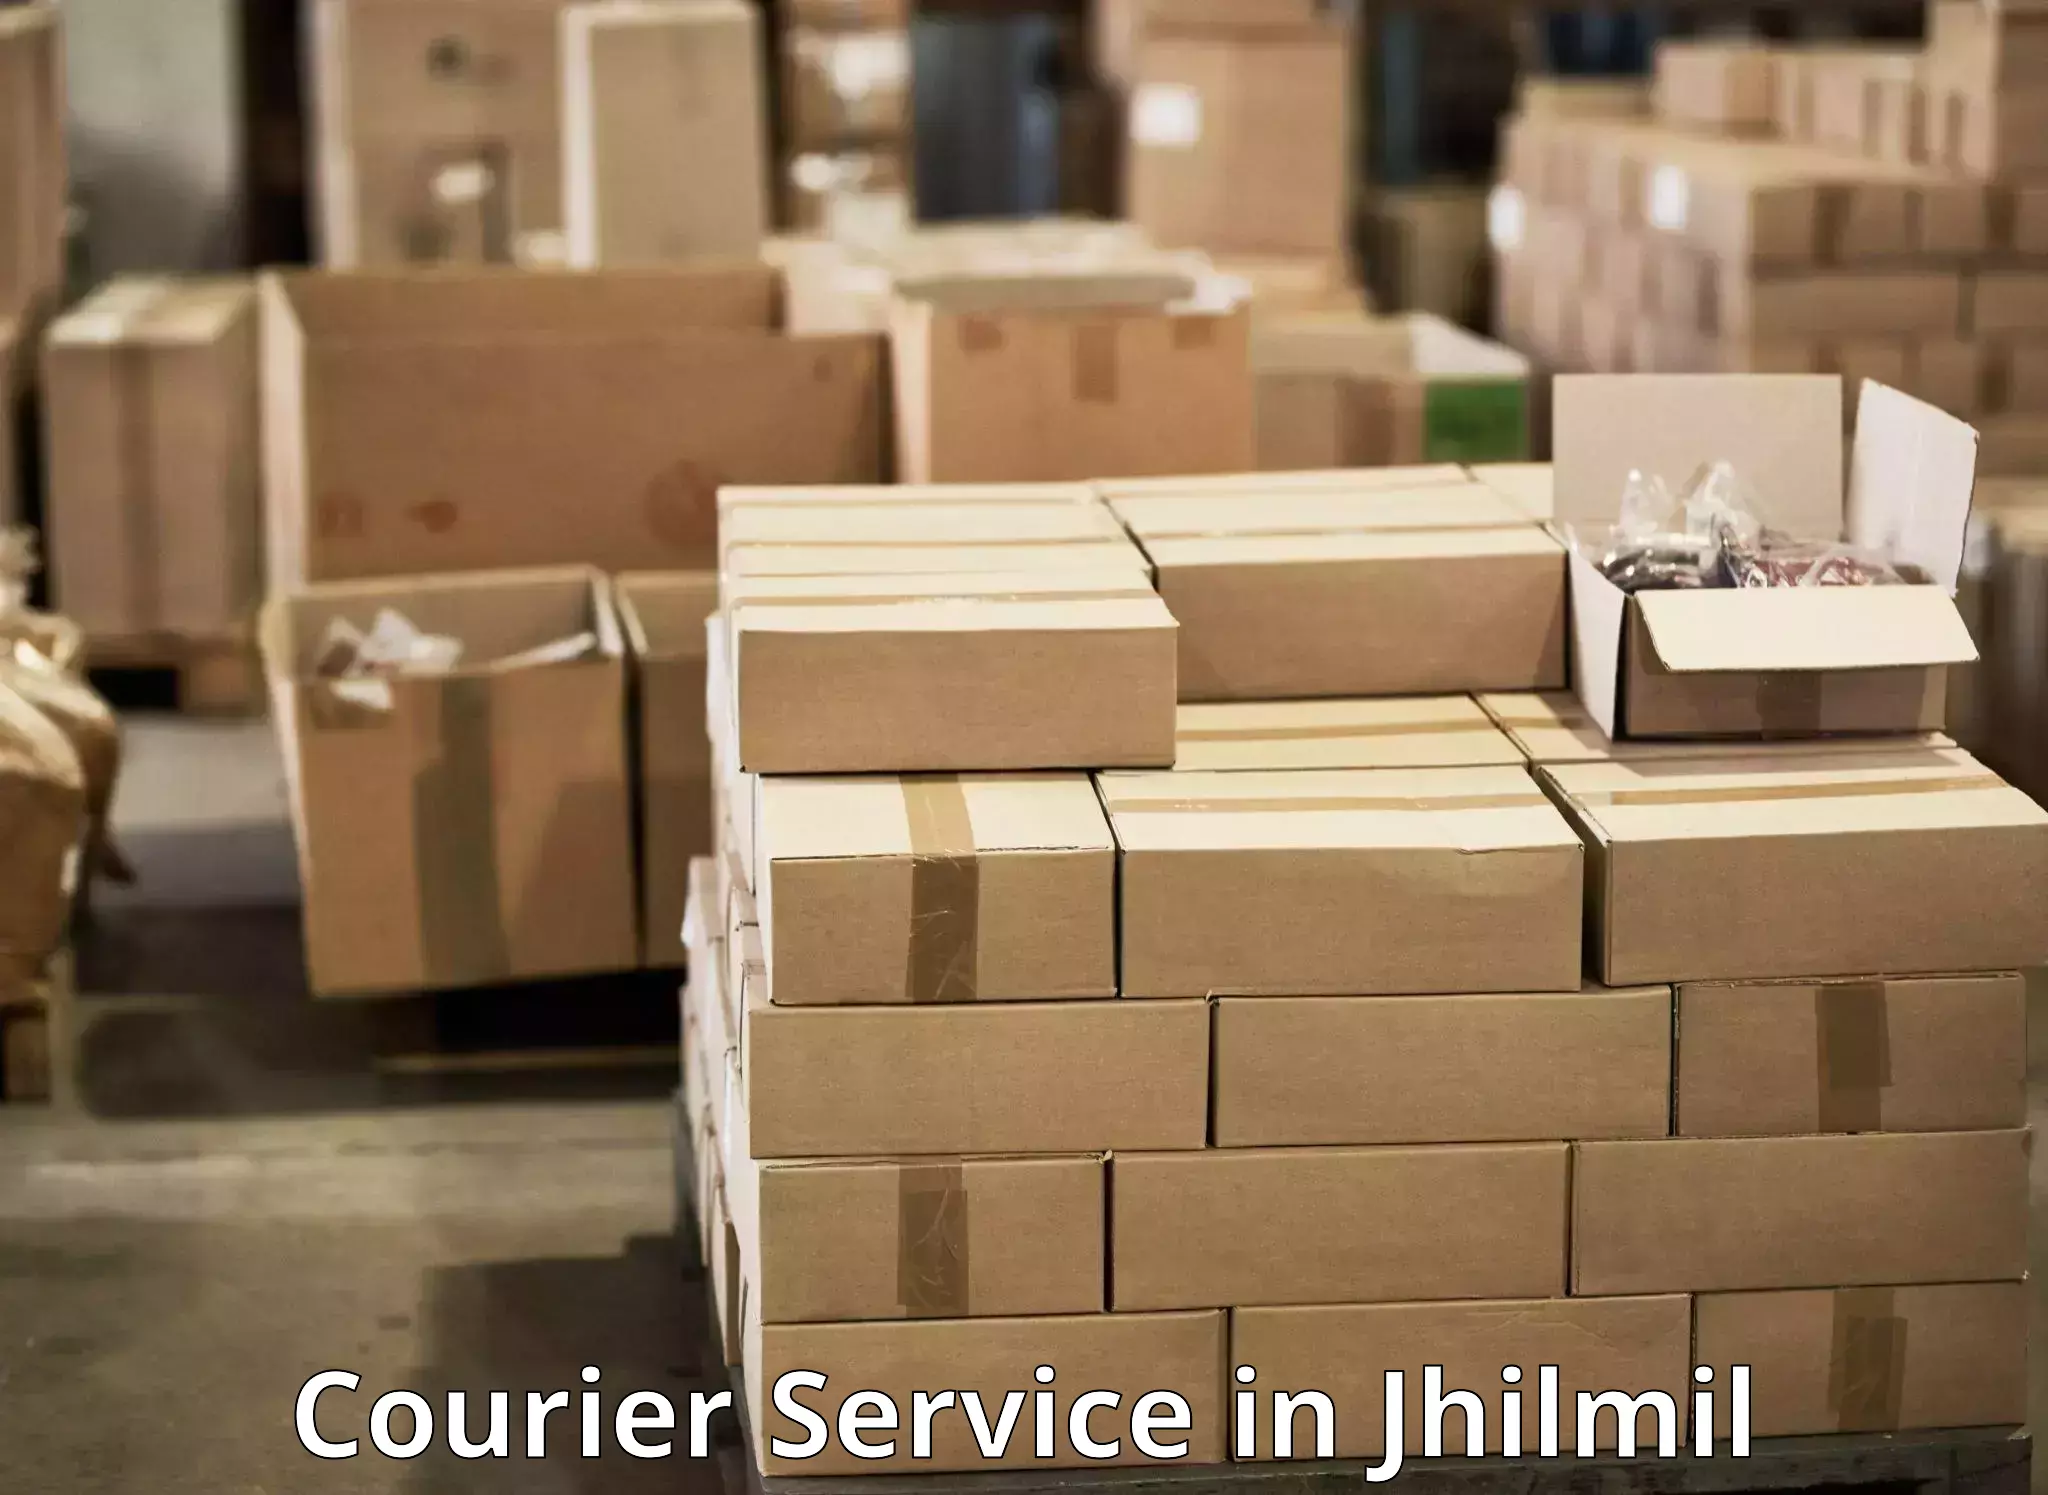 Quality courier services in Jhilmil